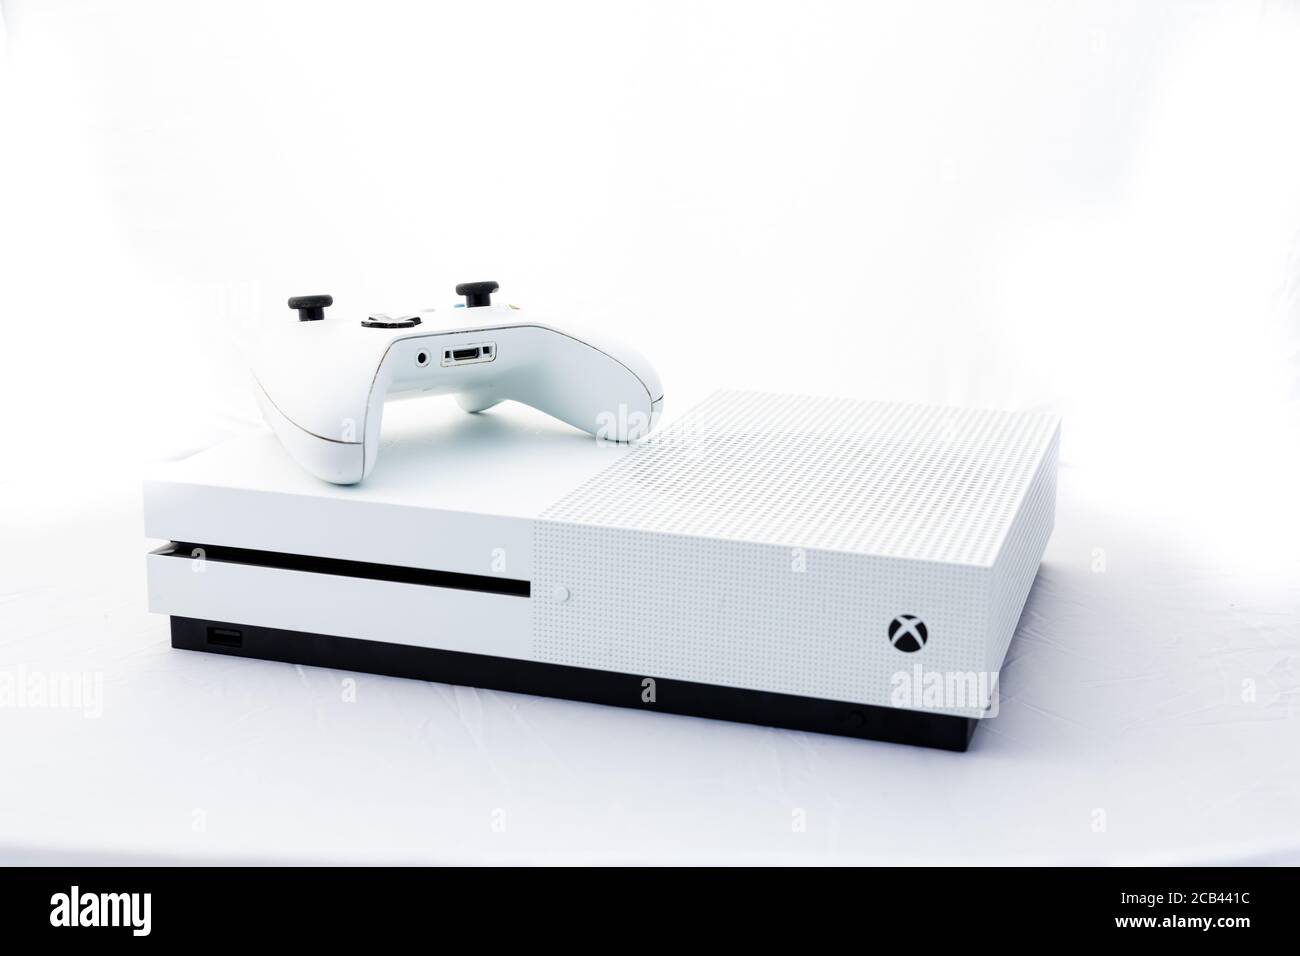 Suffolk, UK June 01 2020: A Microsoft Xbox One S gaming console with a  wireless controller shot against a plain white background Stock Photo -  Alamy